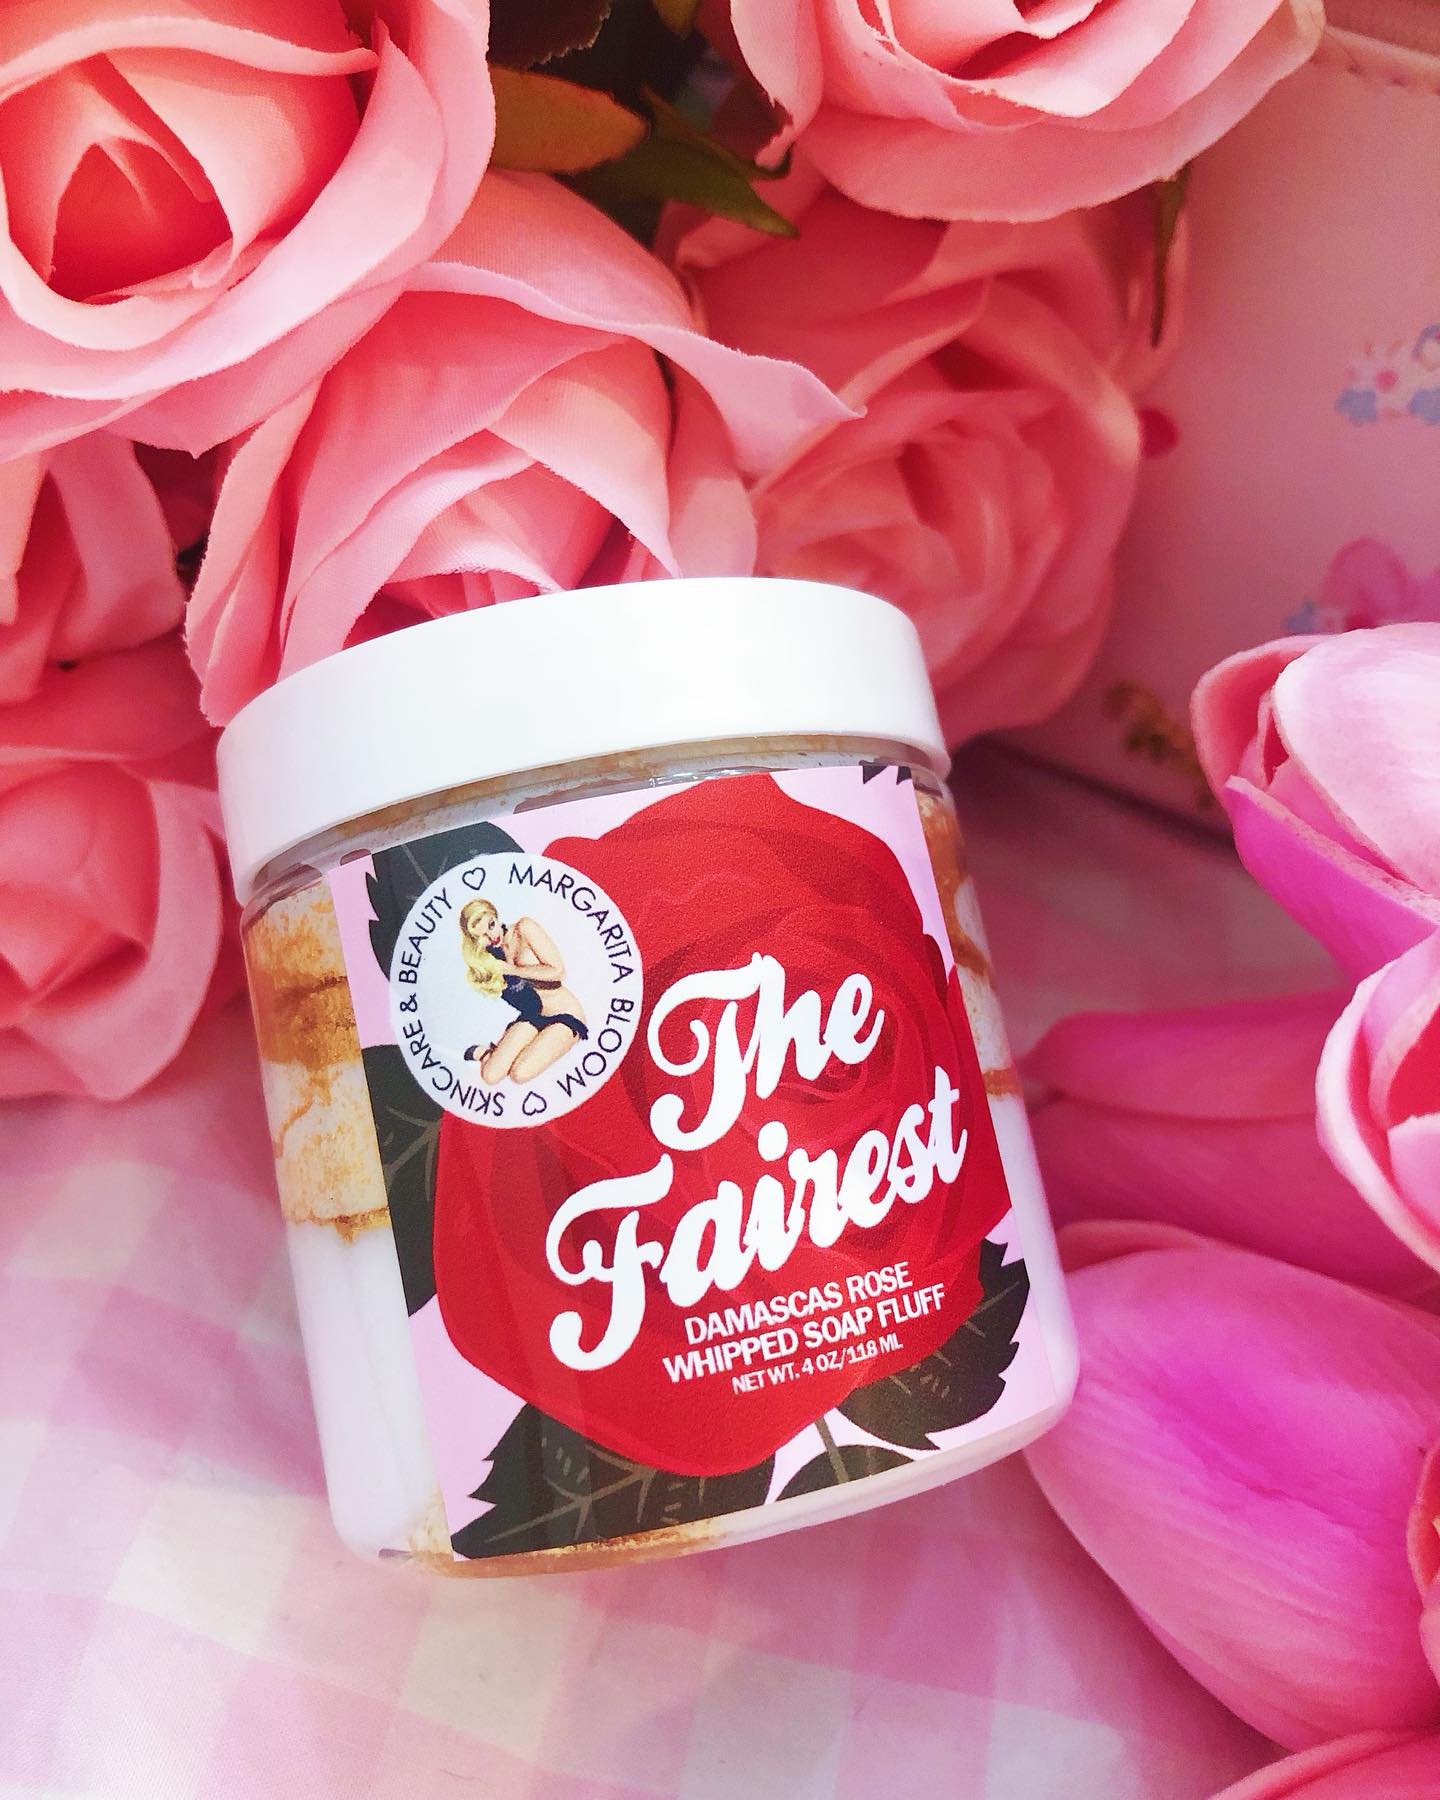 The Fairest in all the land!!! 🌹🌹🌹My Damascus Rose Whipped Soap Fluff!! It smells oh so heavenly! And comes with a red rose shaped soap on top! In my shop!!!! www.margarita-bloom.com 🌹🎀💕
.
#margaritabloom #redroae #snowwhite #thefairest #whippe